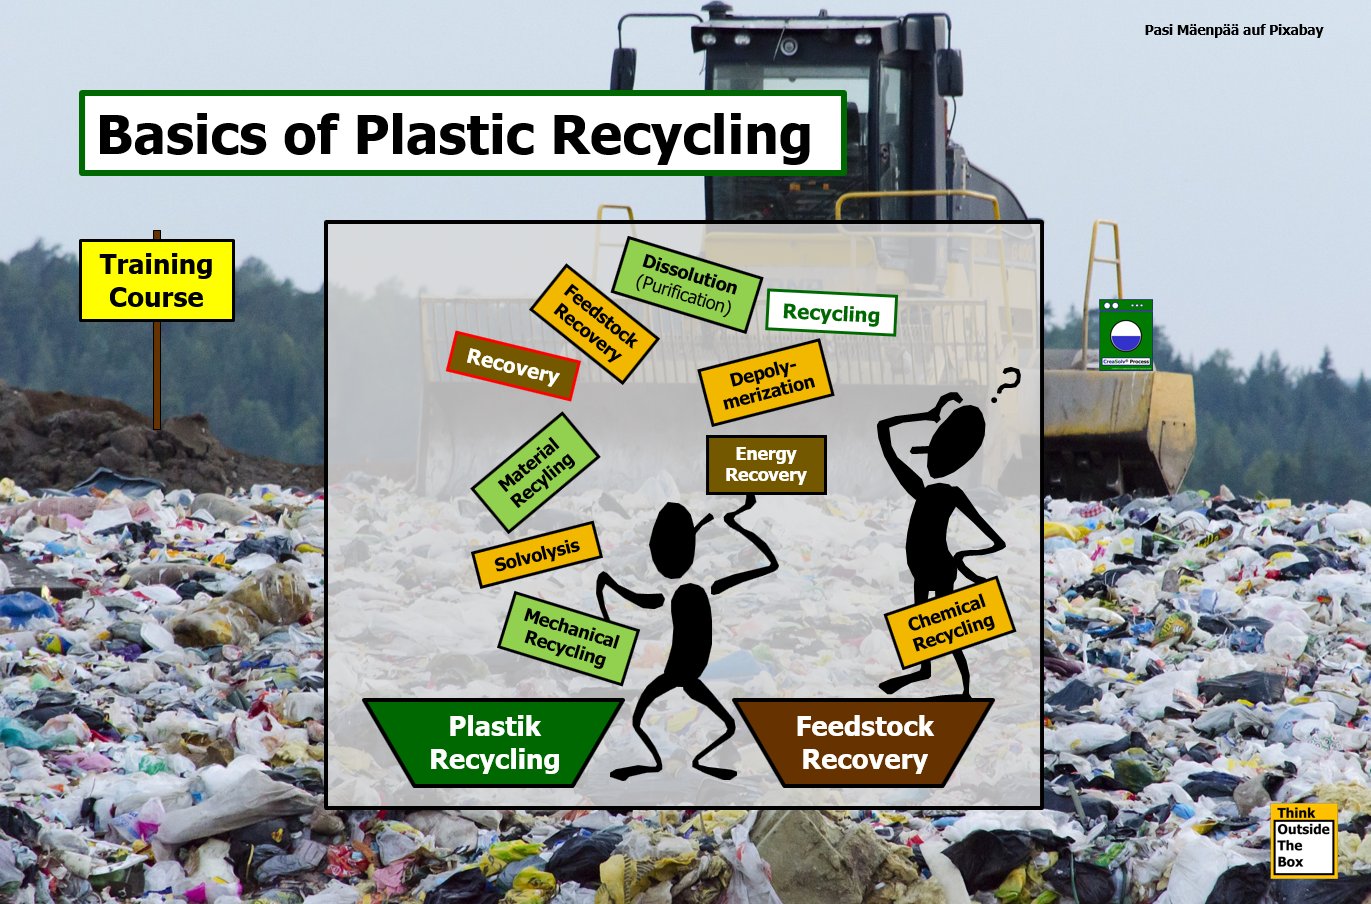 2020.04.01 Basics of Plastic Recycling Training Course